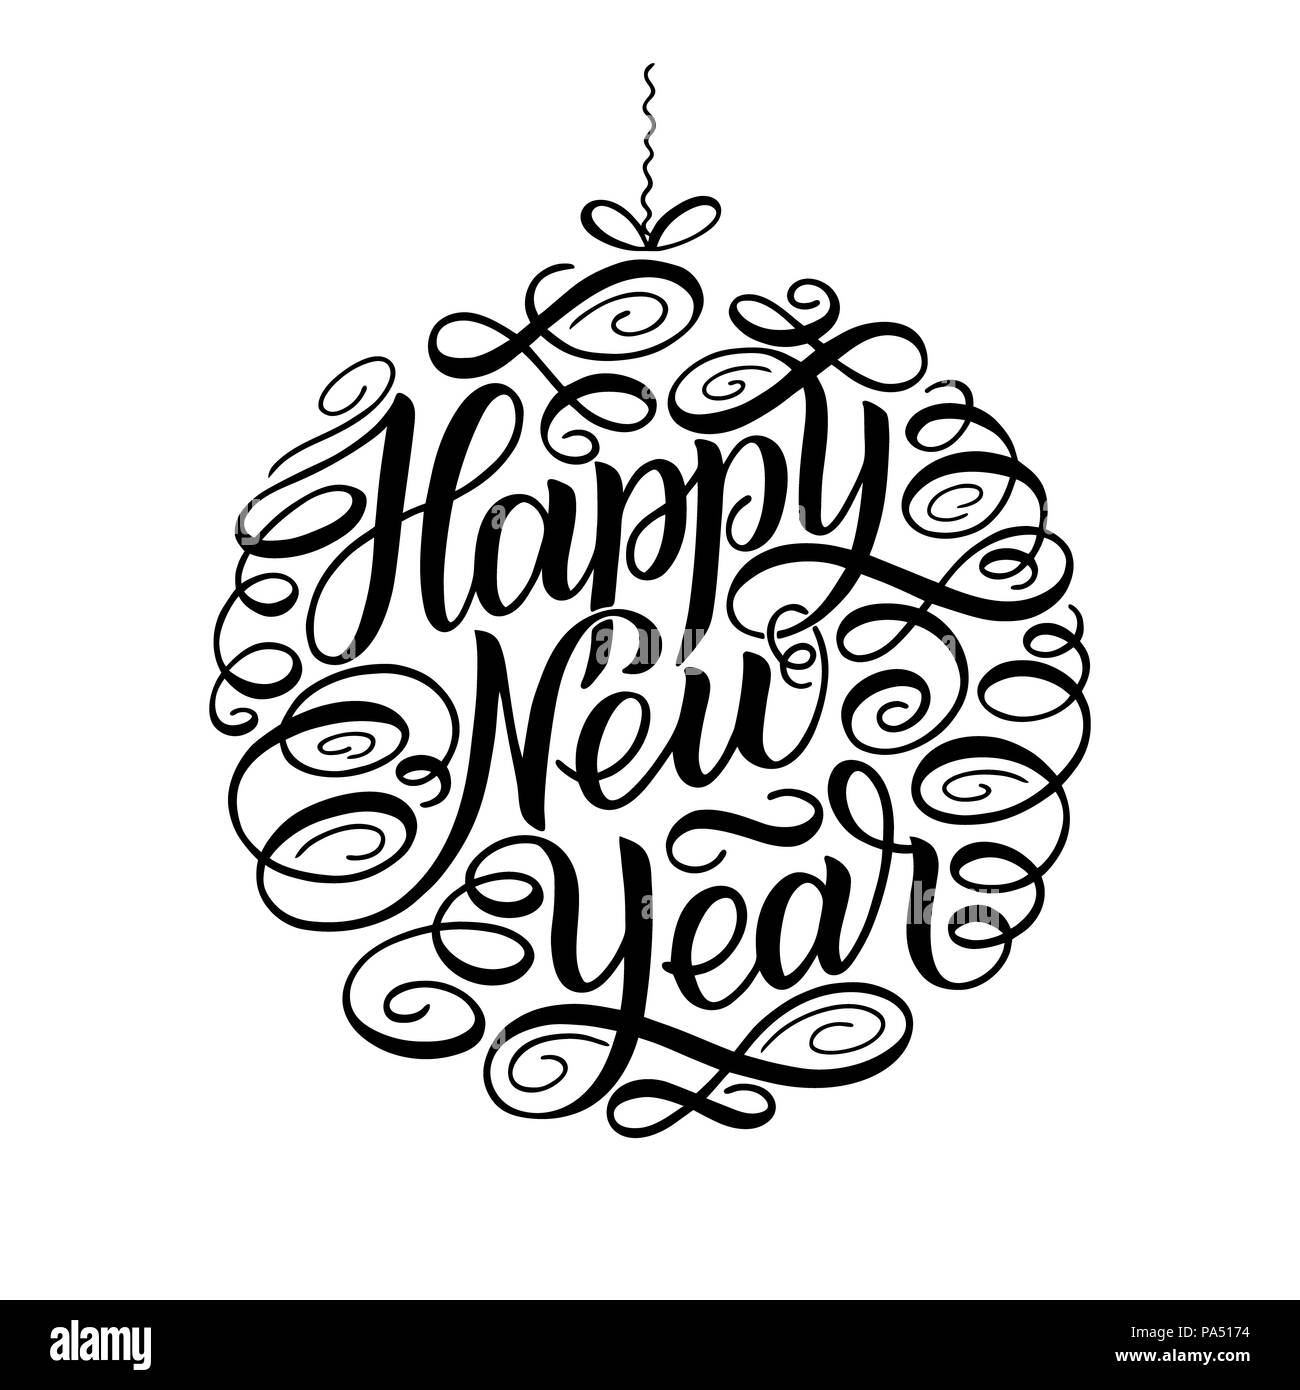 Happy New Year, lettering Greeting Card design circle text frame isolated on white. illustration. Christmas tree toy ball Stock Photo